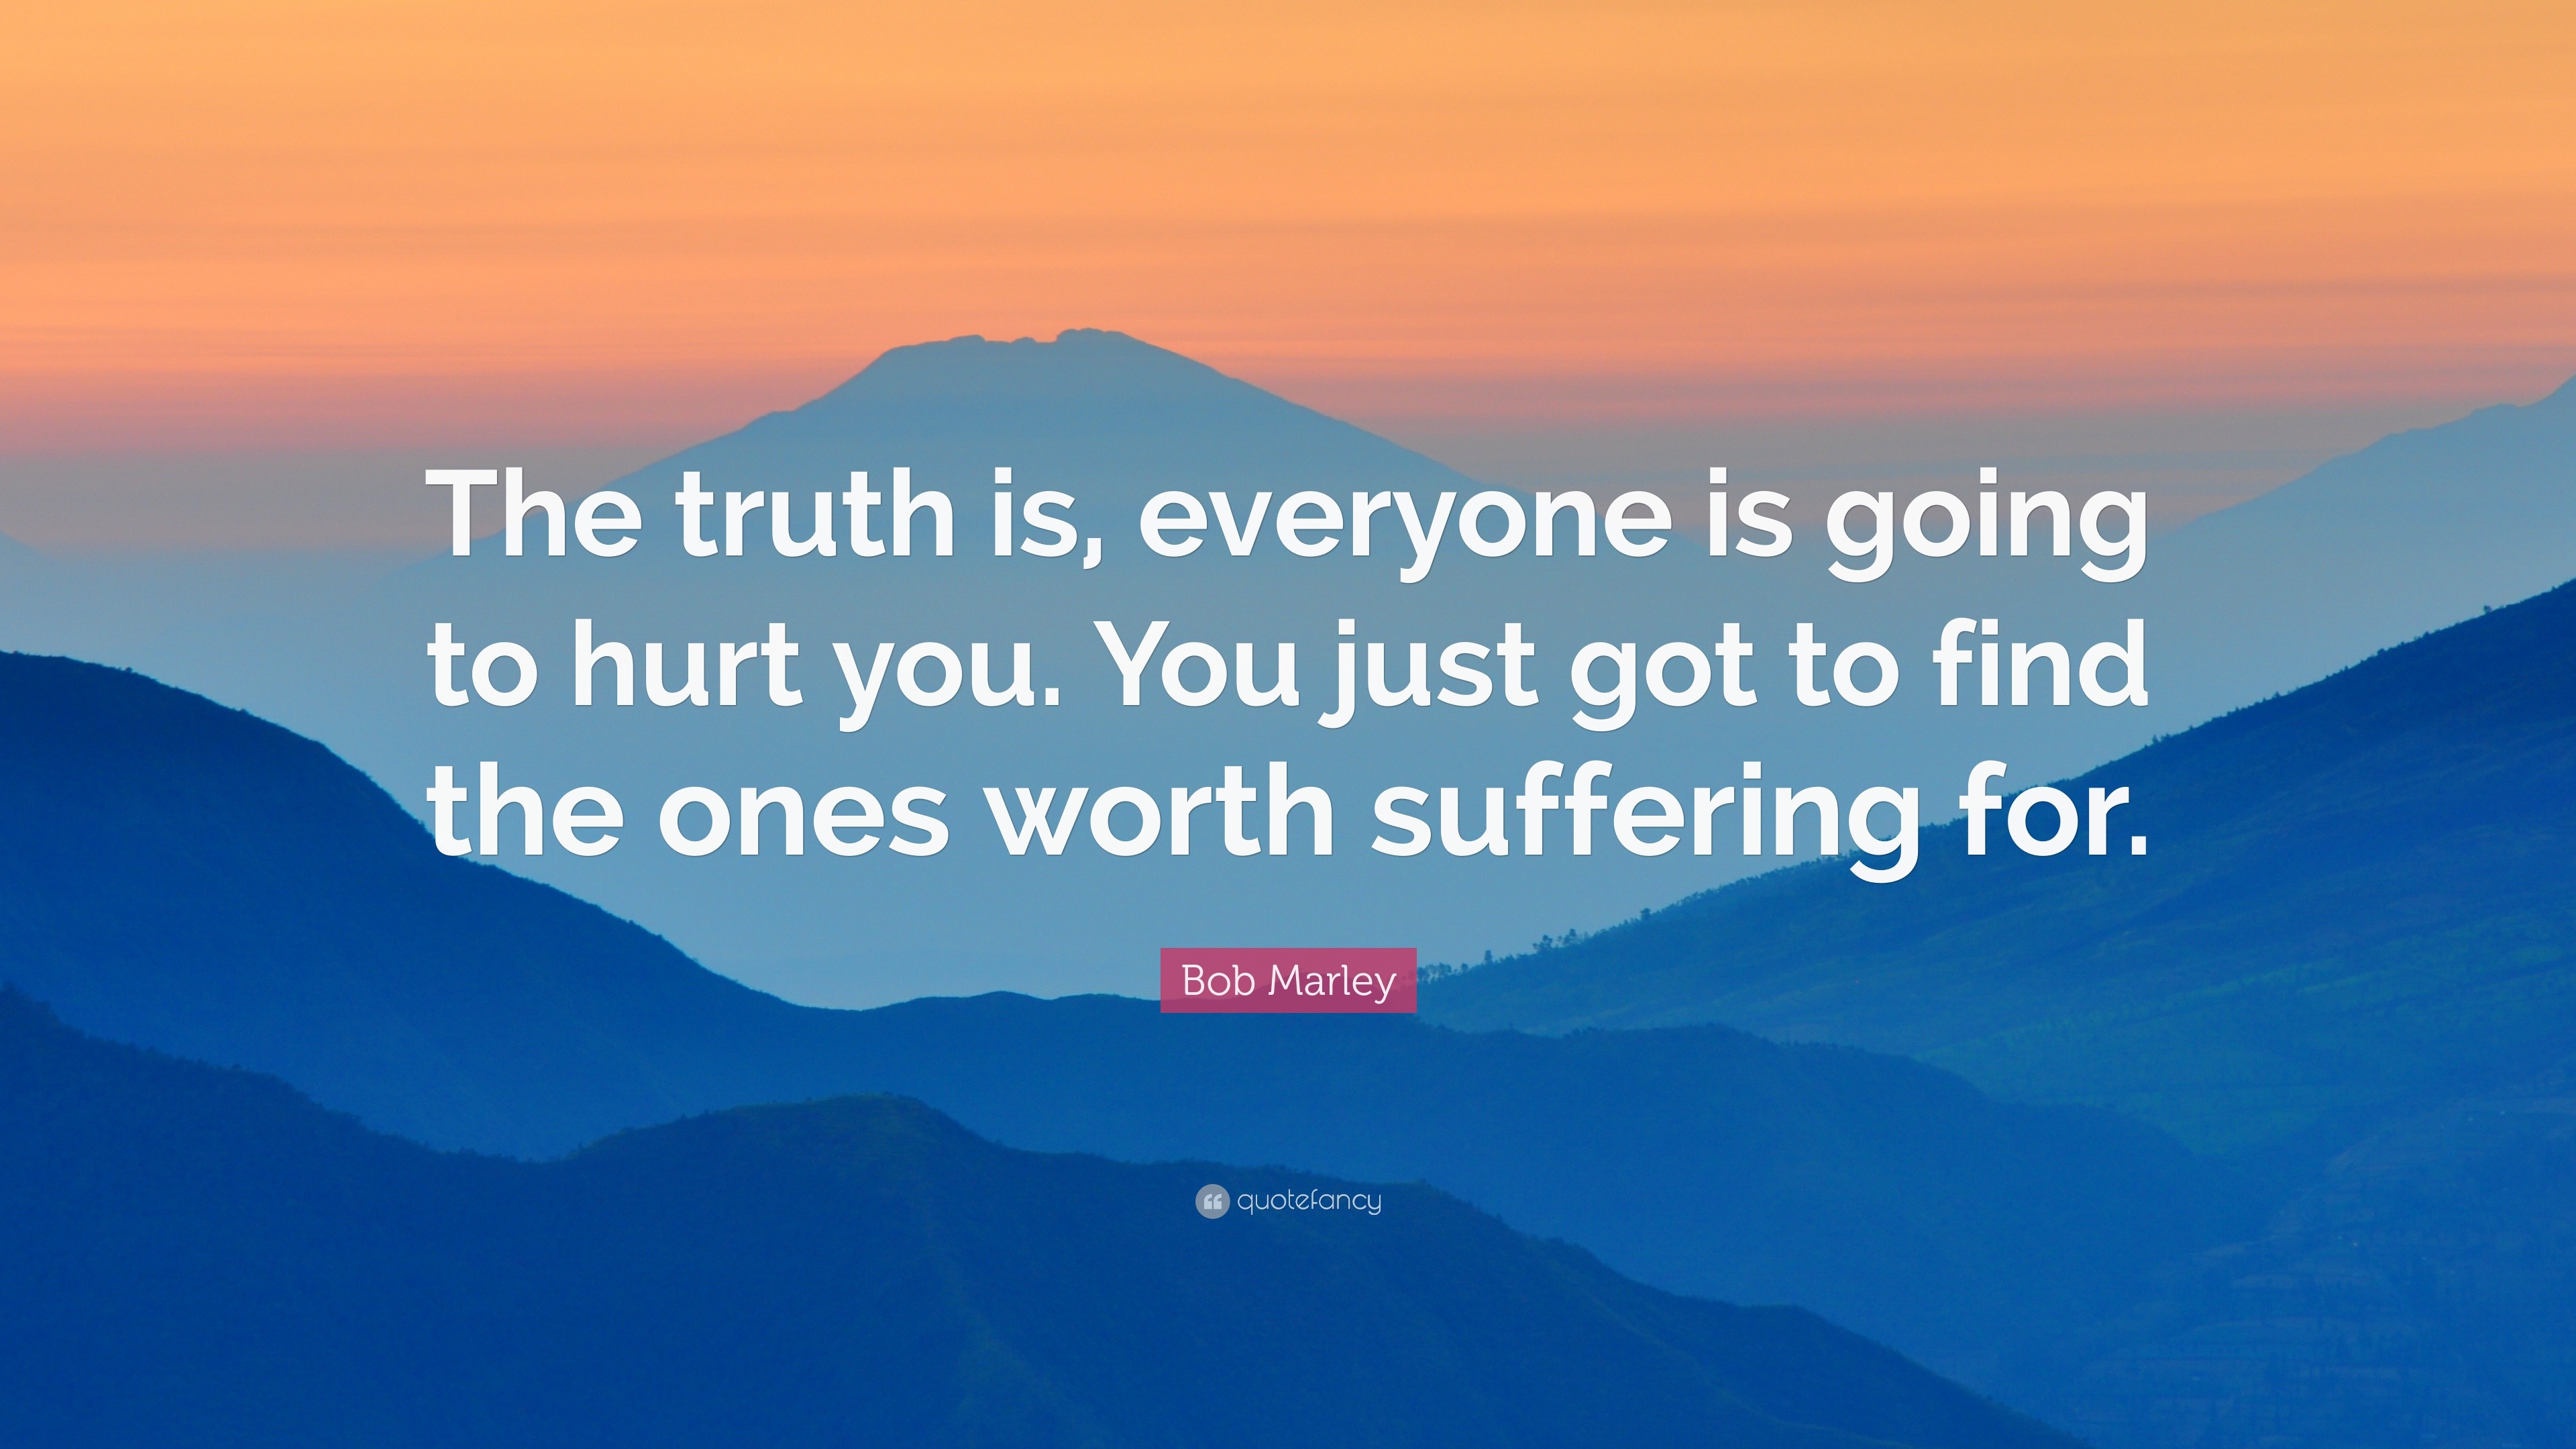 Bob Marley Quote: "The truth is, everyone is going to hurt ...